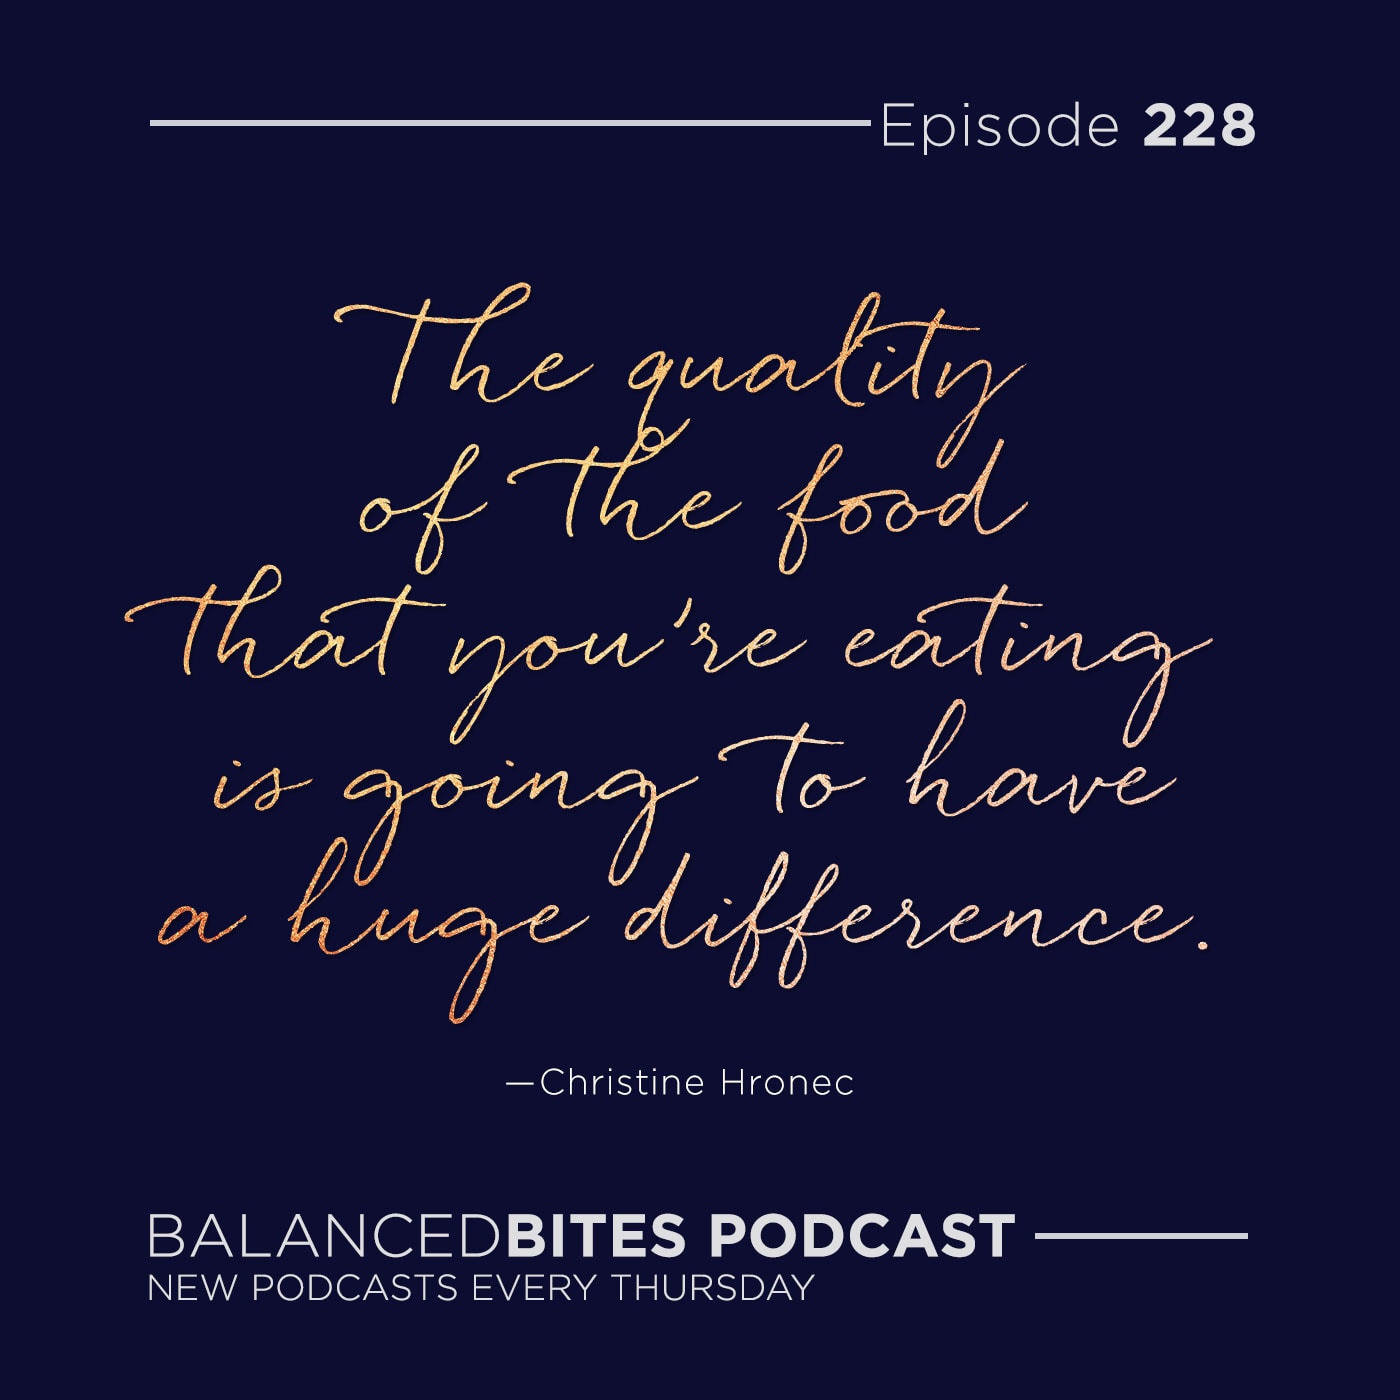 All About Carbs with Christine Hronec - Diane Sanfilippo, Liz Wolfe | Balanced Bites